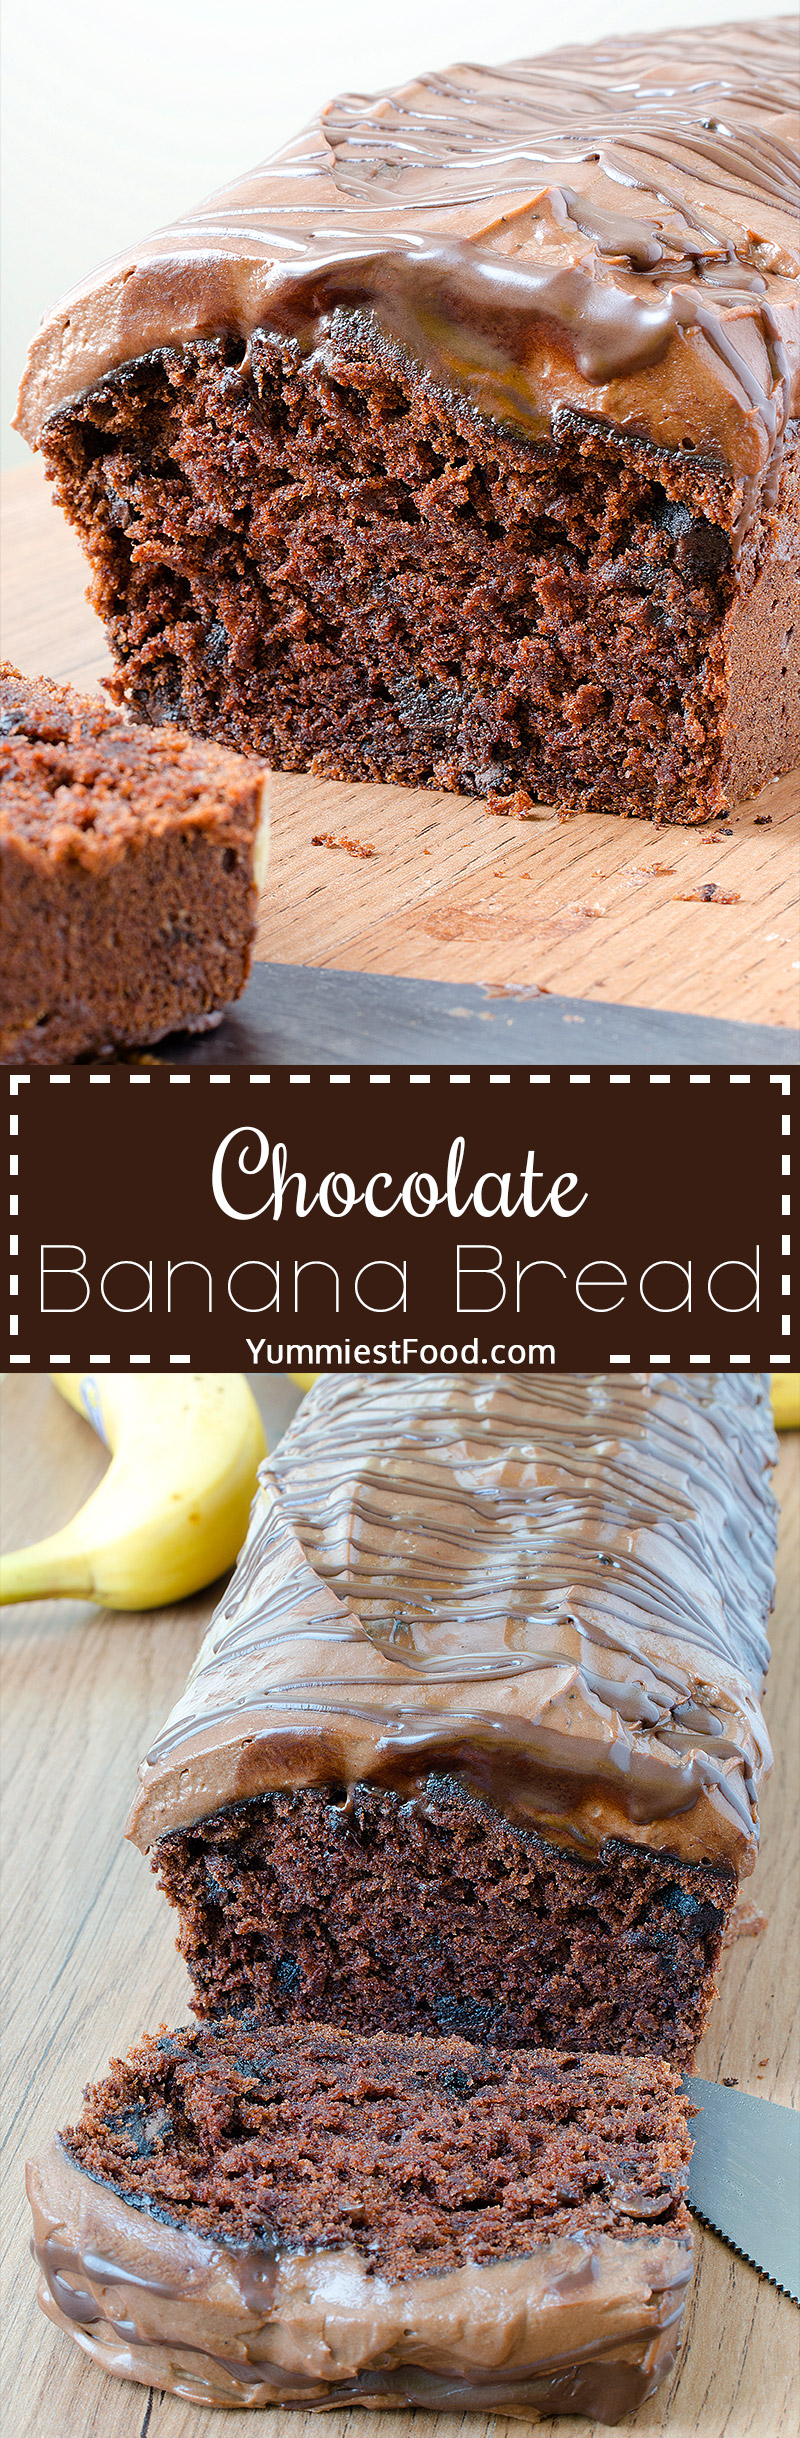 Chocolate Banana Bread - Soft, light and delicious